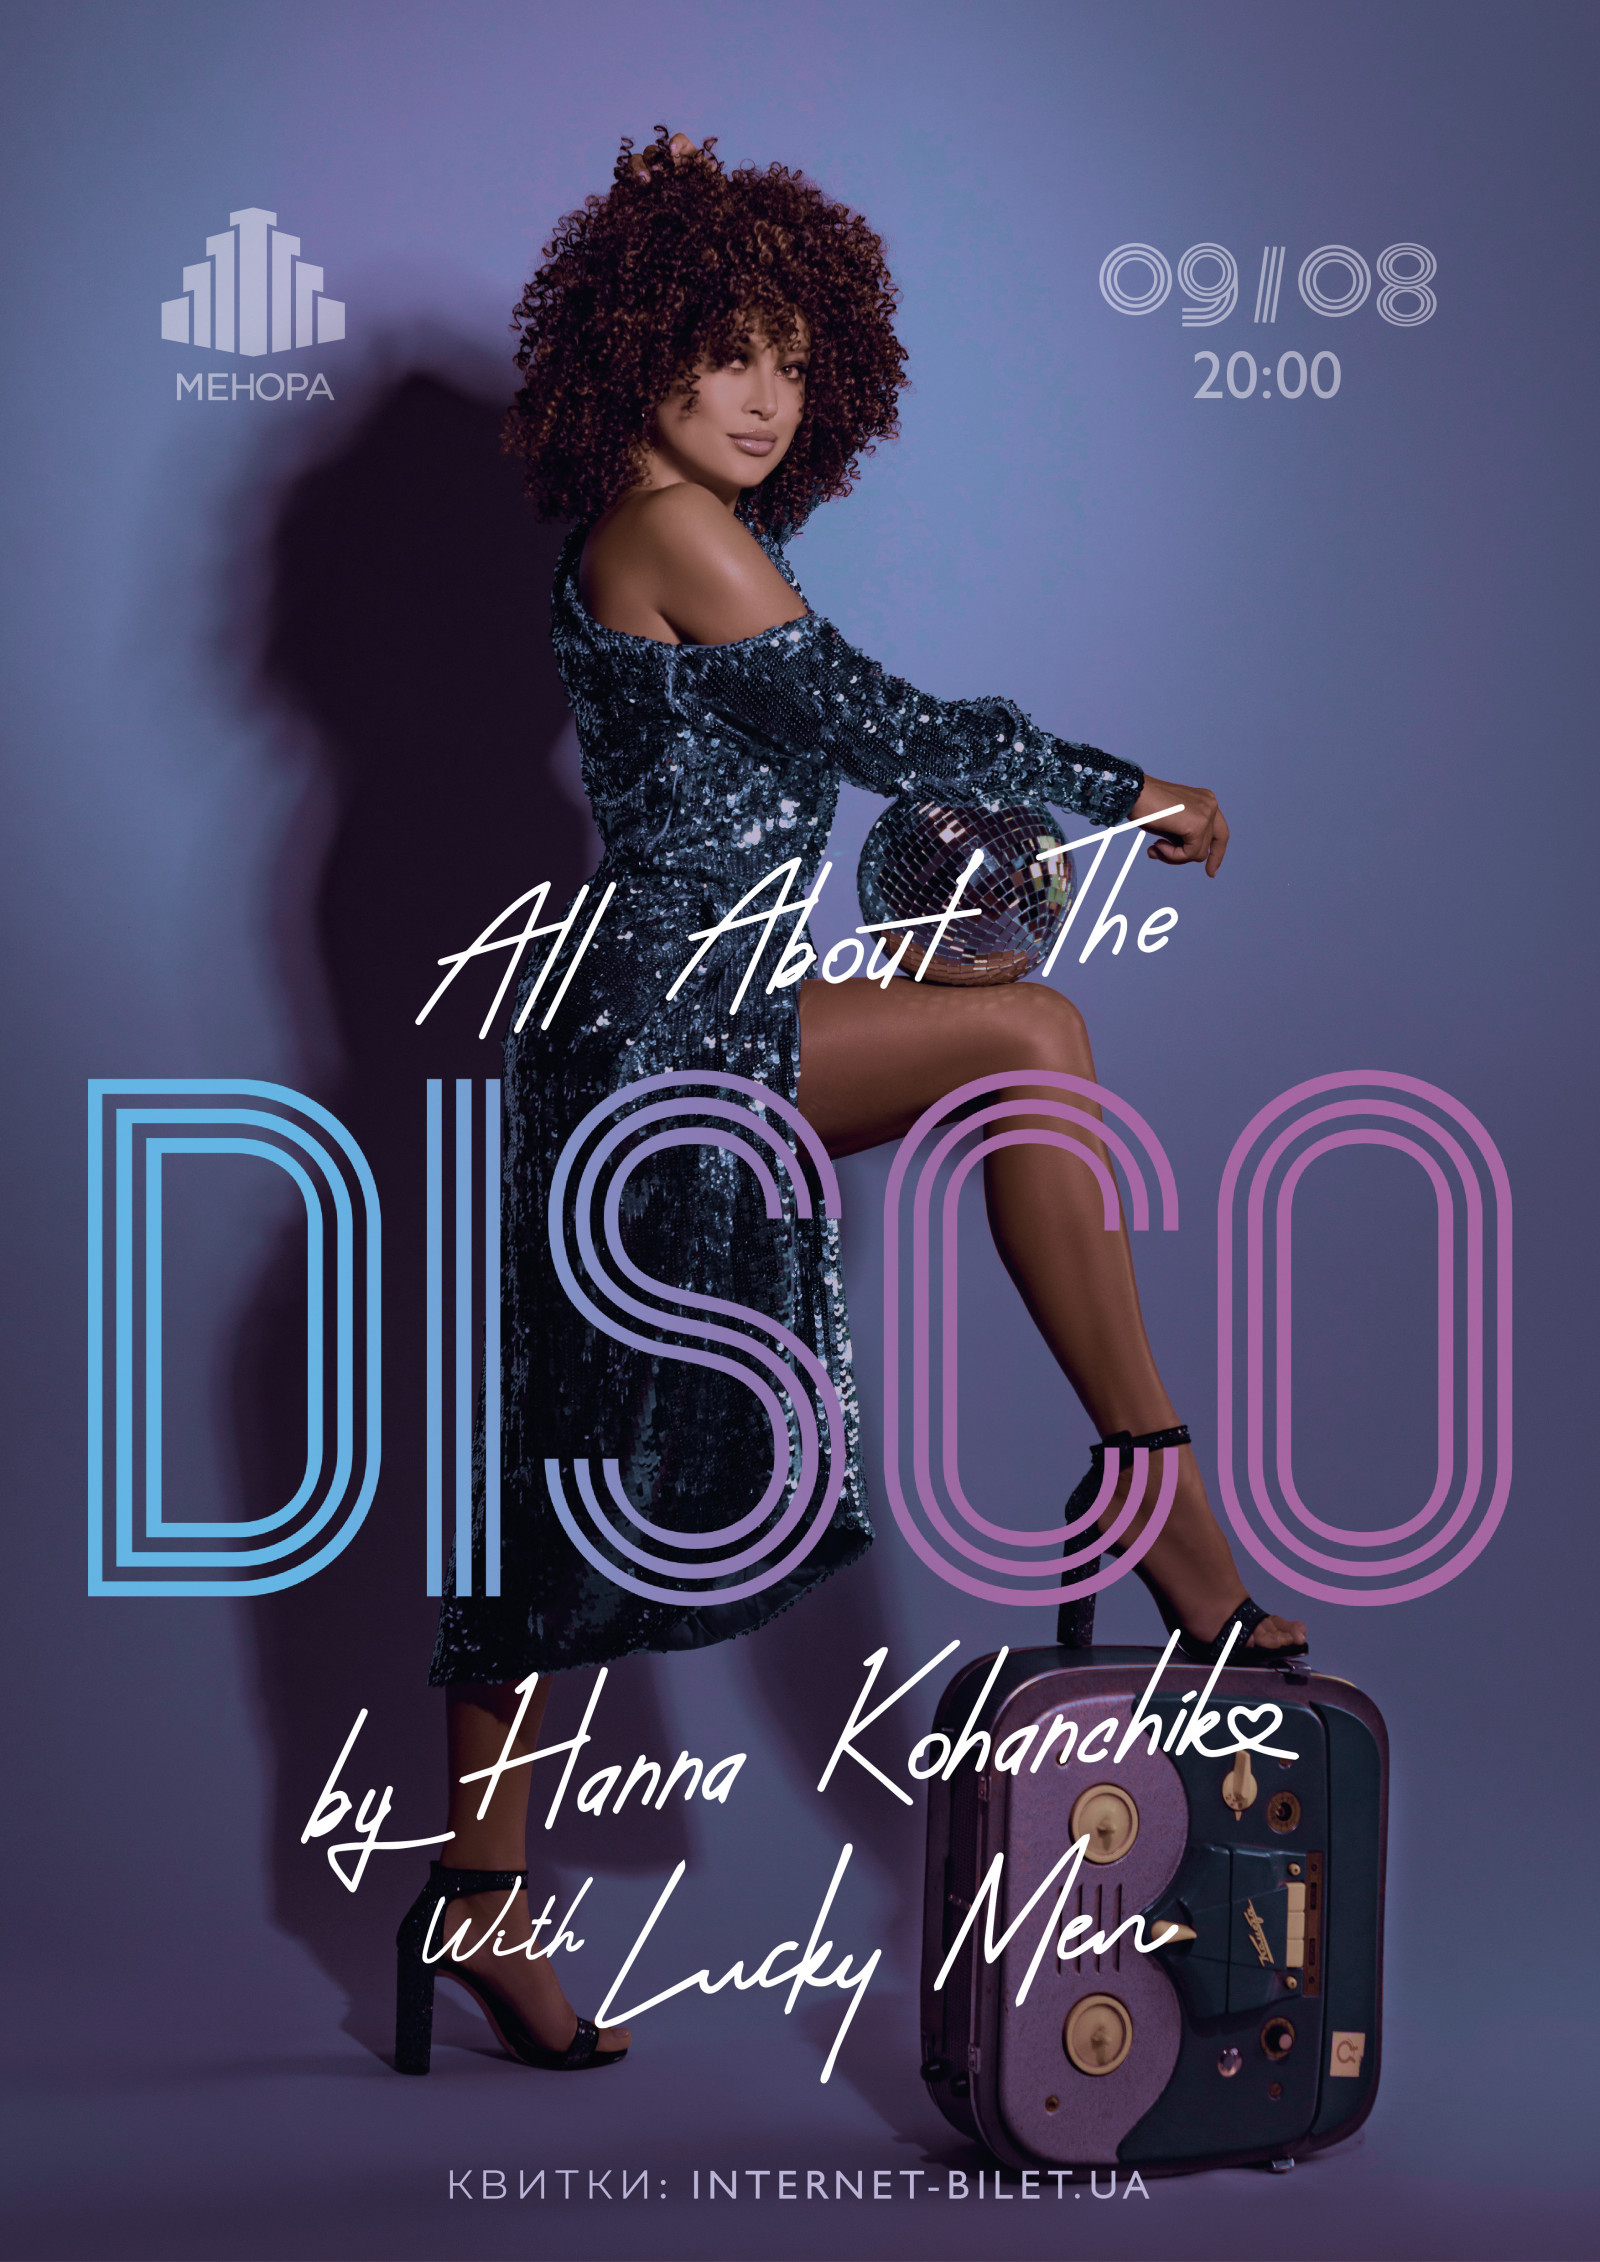 All about The Disco Днепр, 09.08.2021, купить билеты. Афиша Днепра